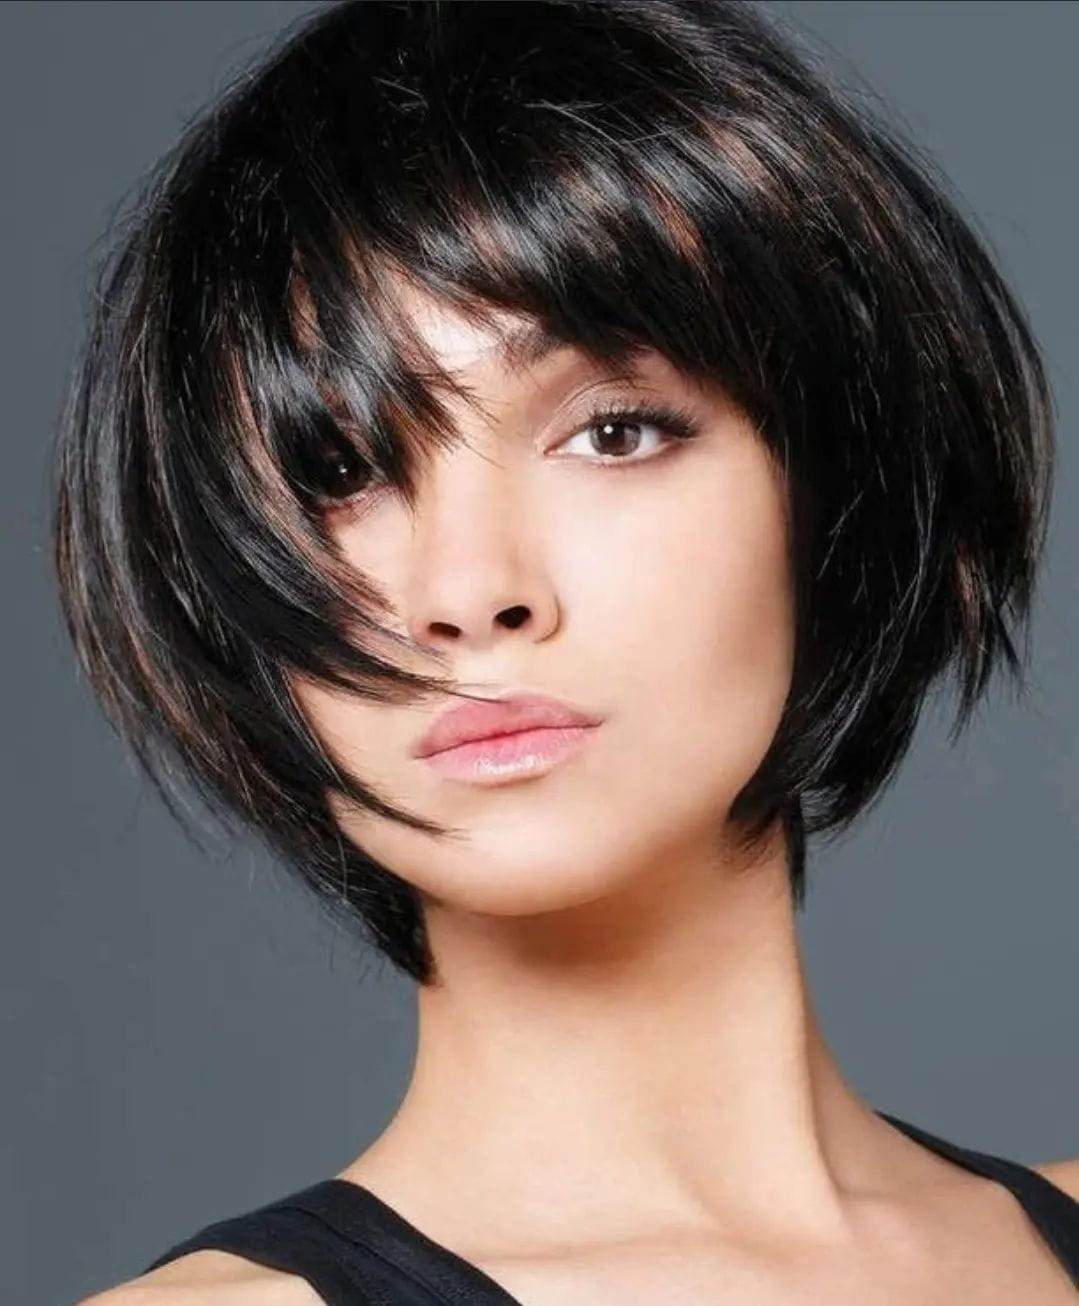 100+ Best Short Hairstyles & Haircuts For Women In 2023 images 84